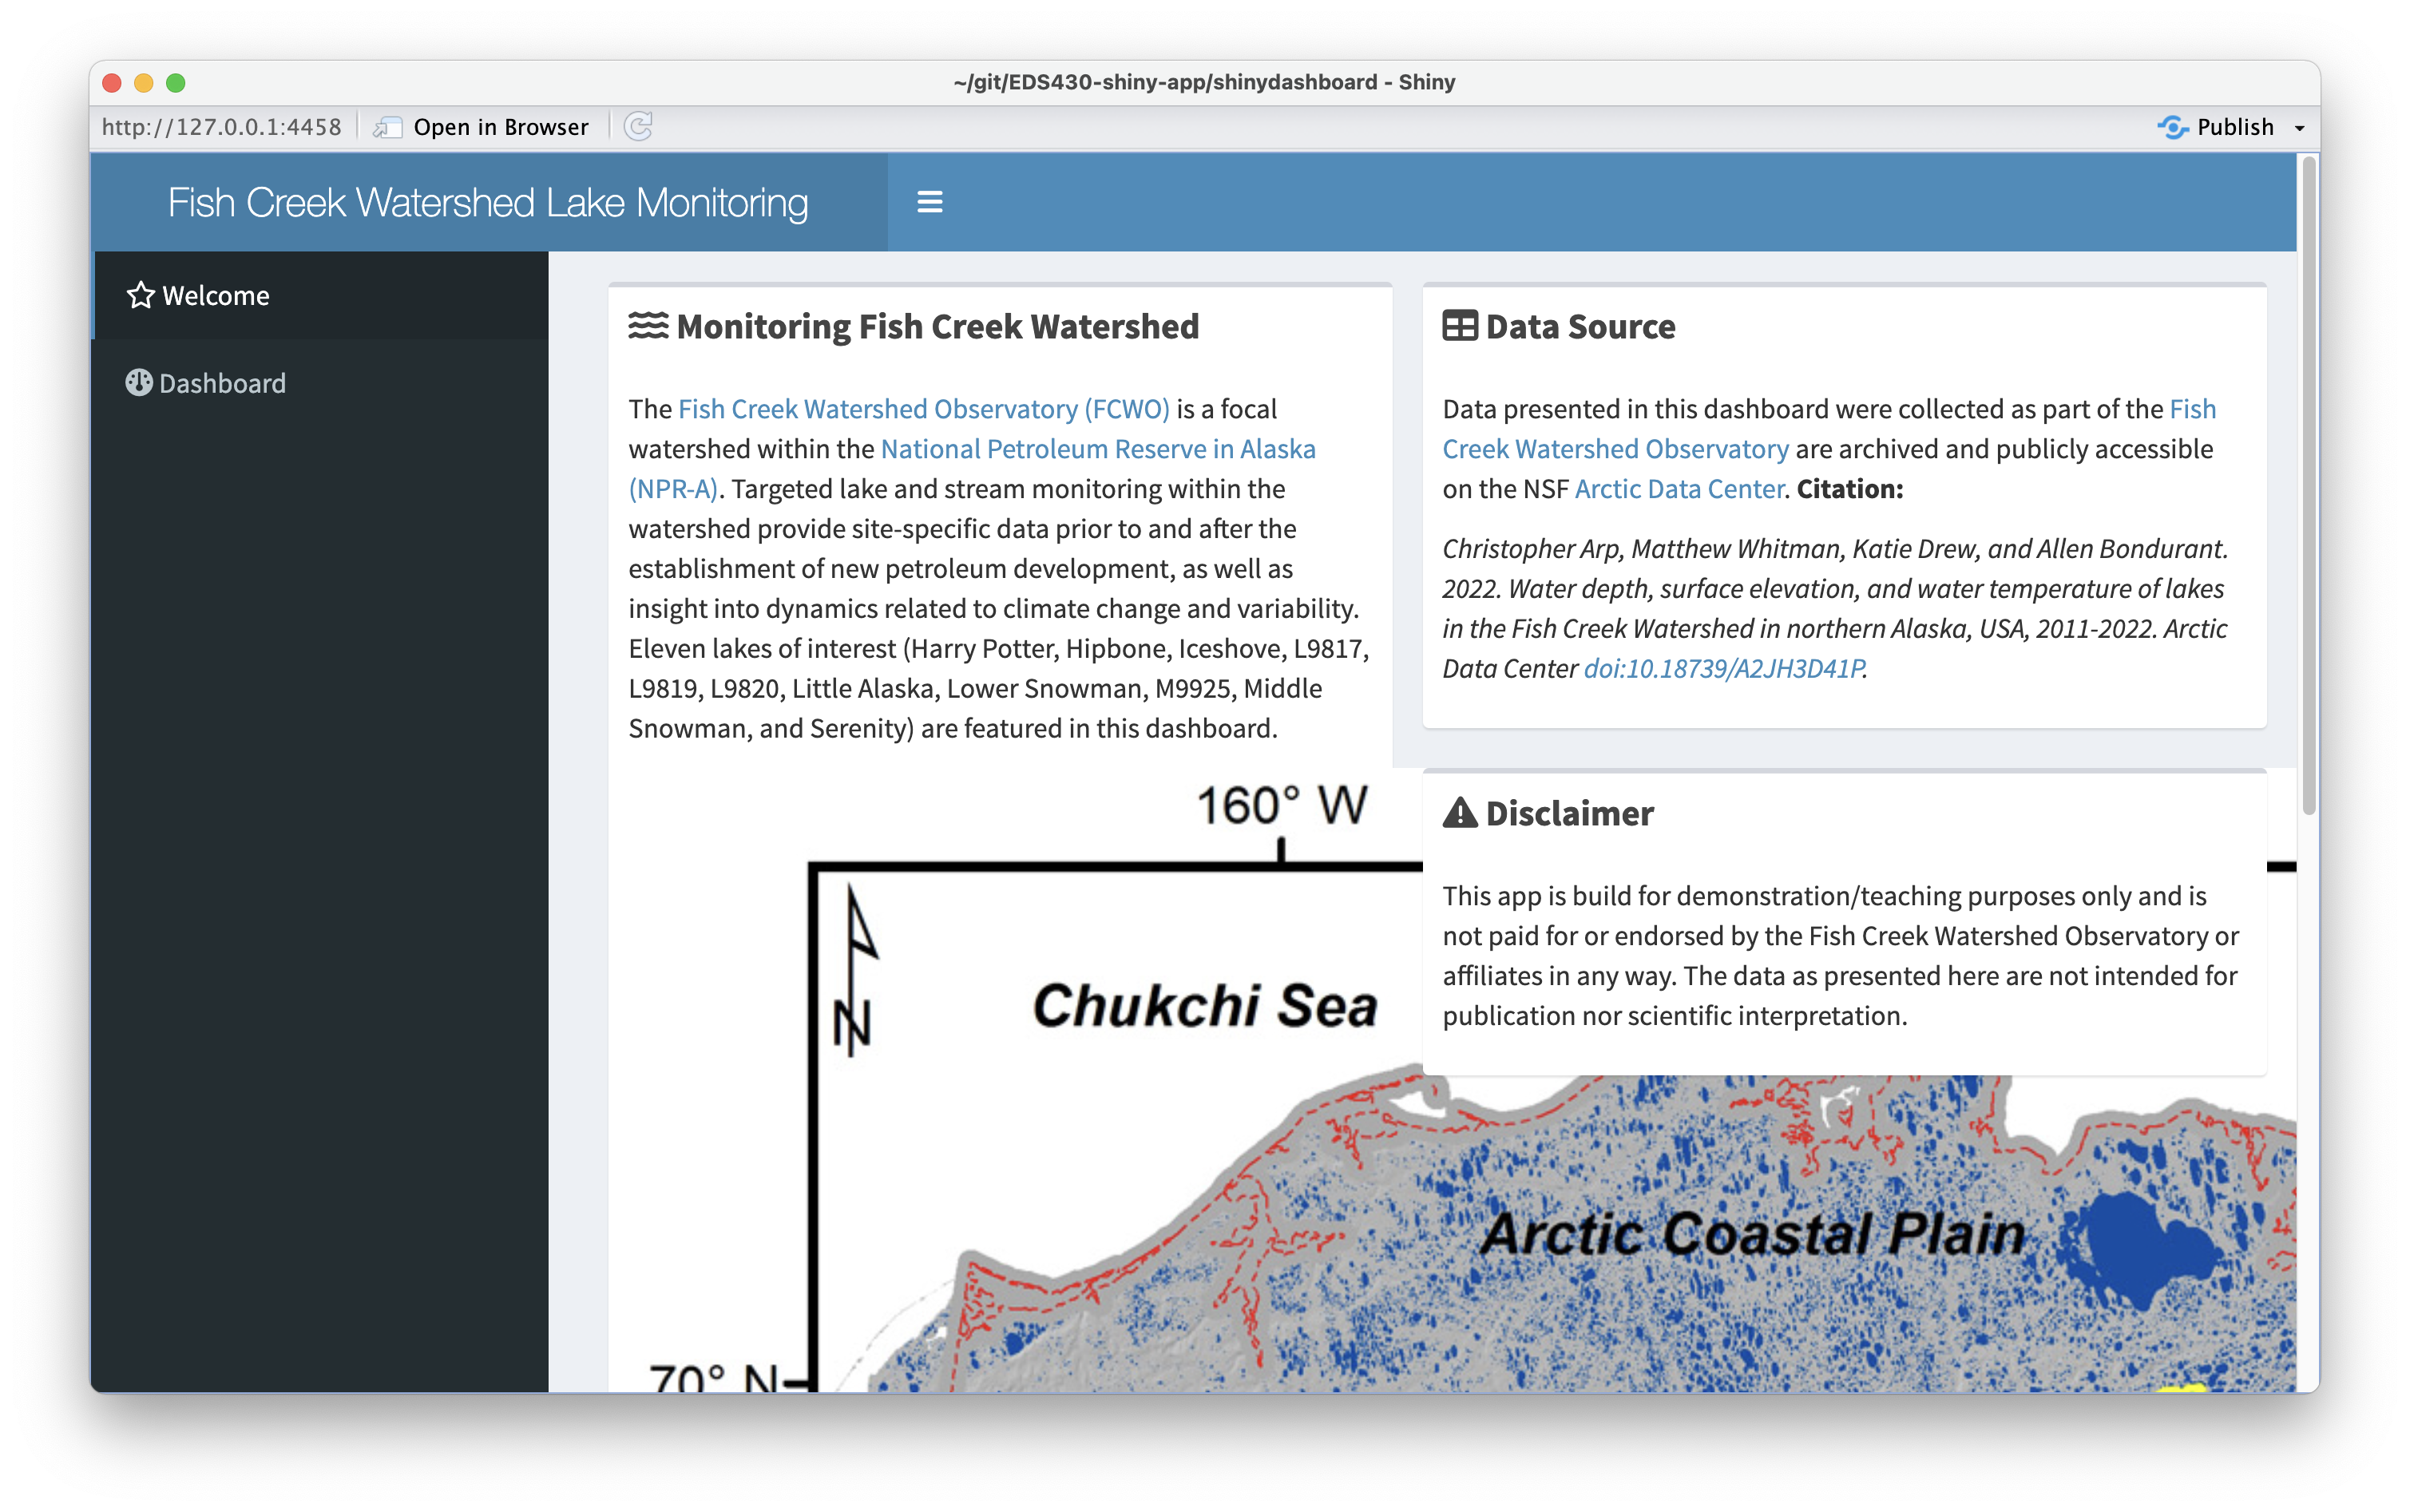 Our Welcome page, with a map of Fish Creek Watershed beneath the intro text. The image is extremely large, spilling out of the box and across the page.